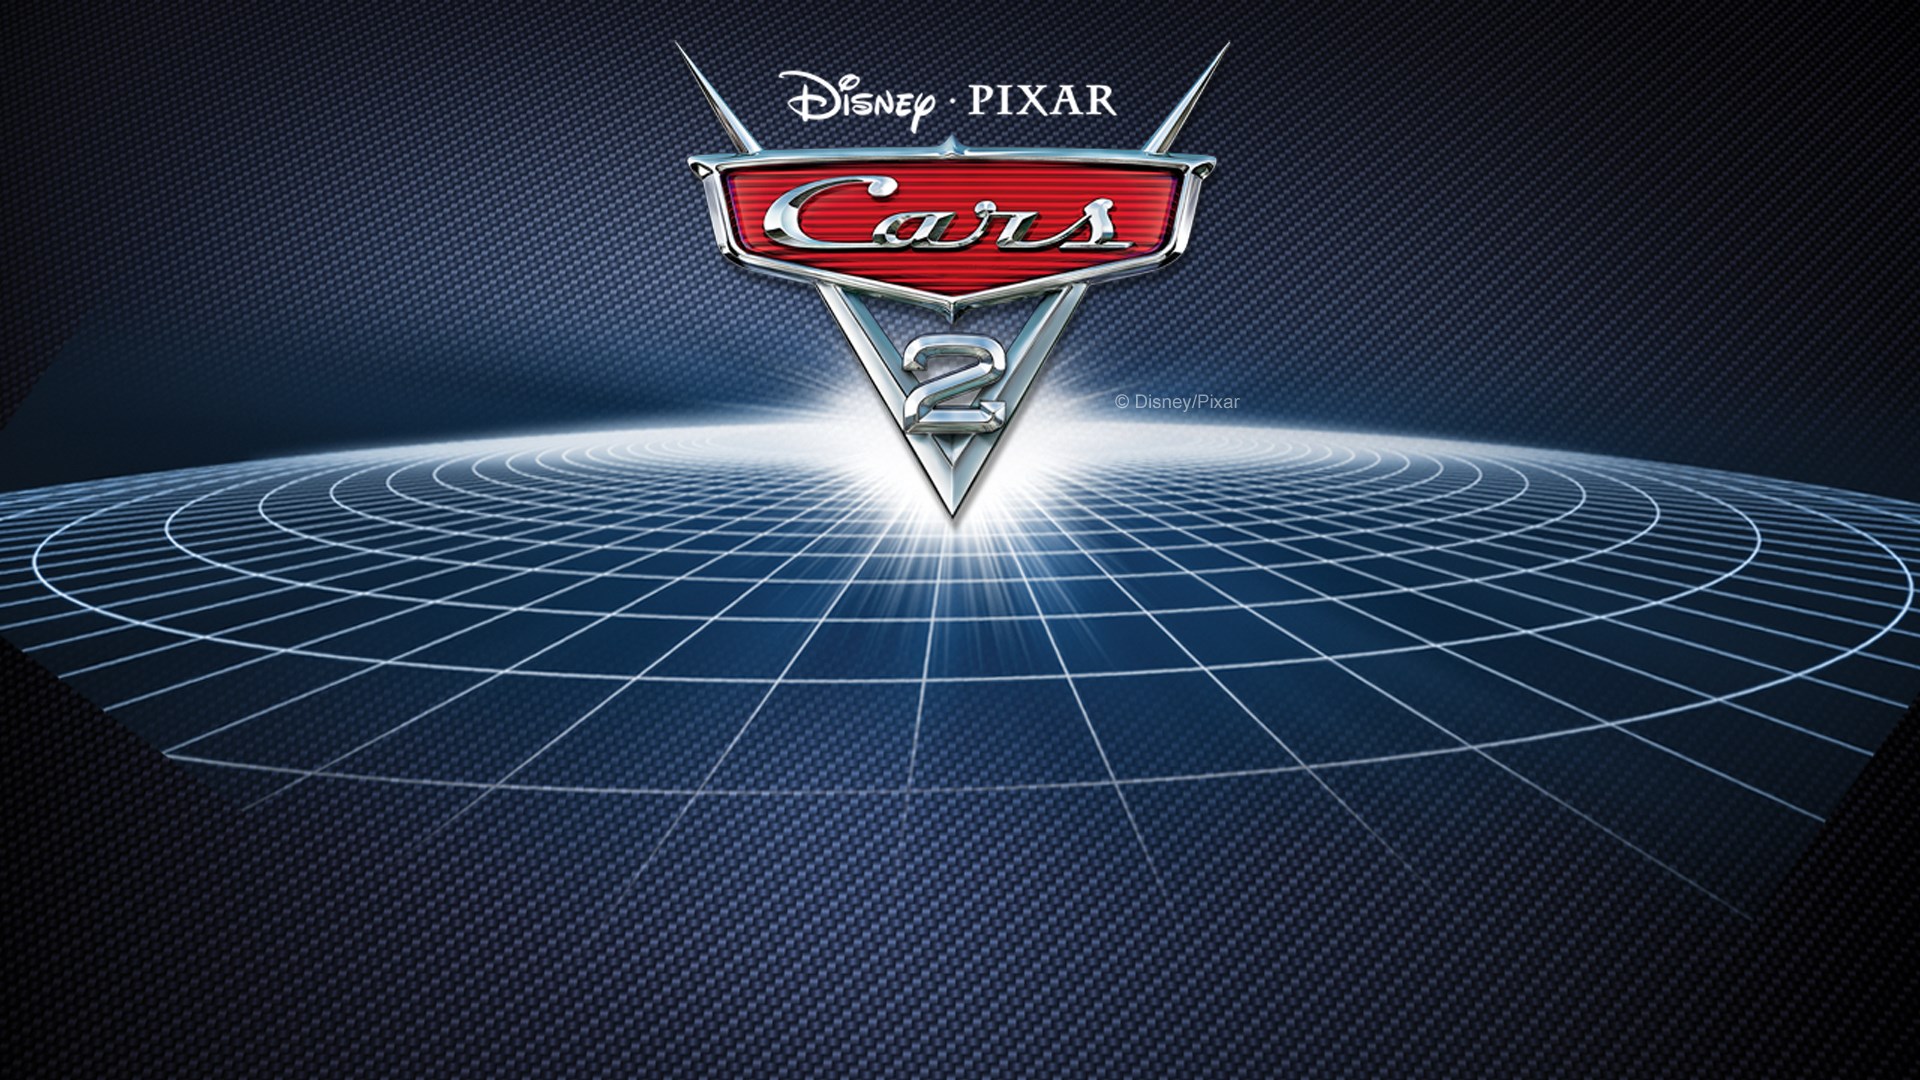 cars 2 the video game xbox 360